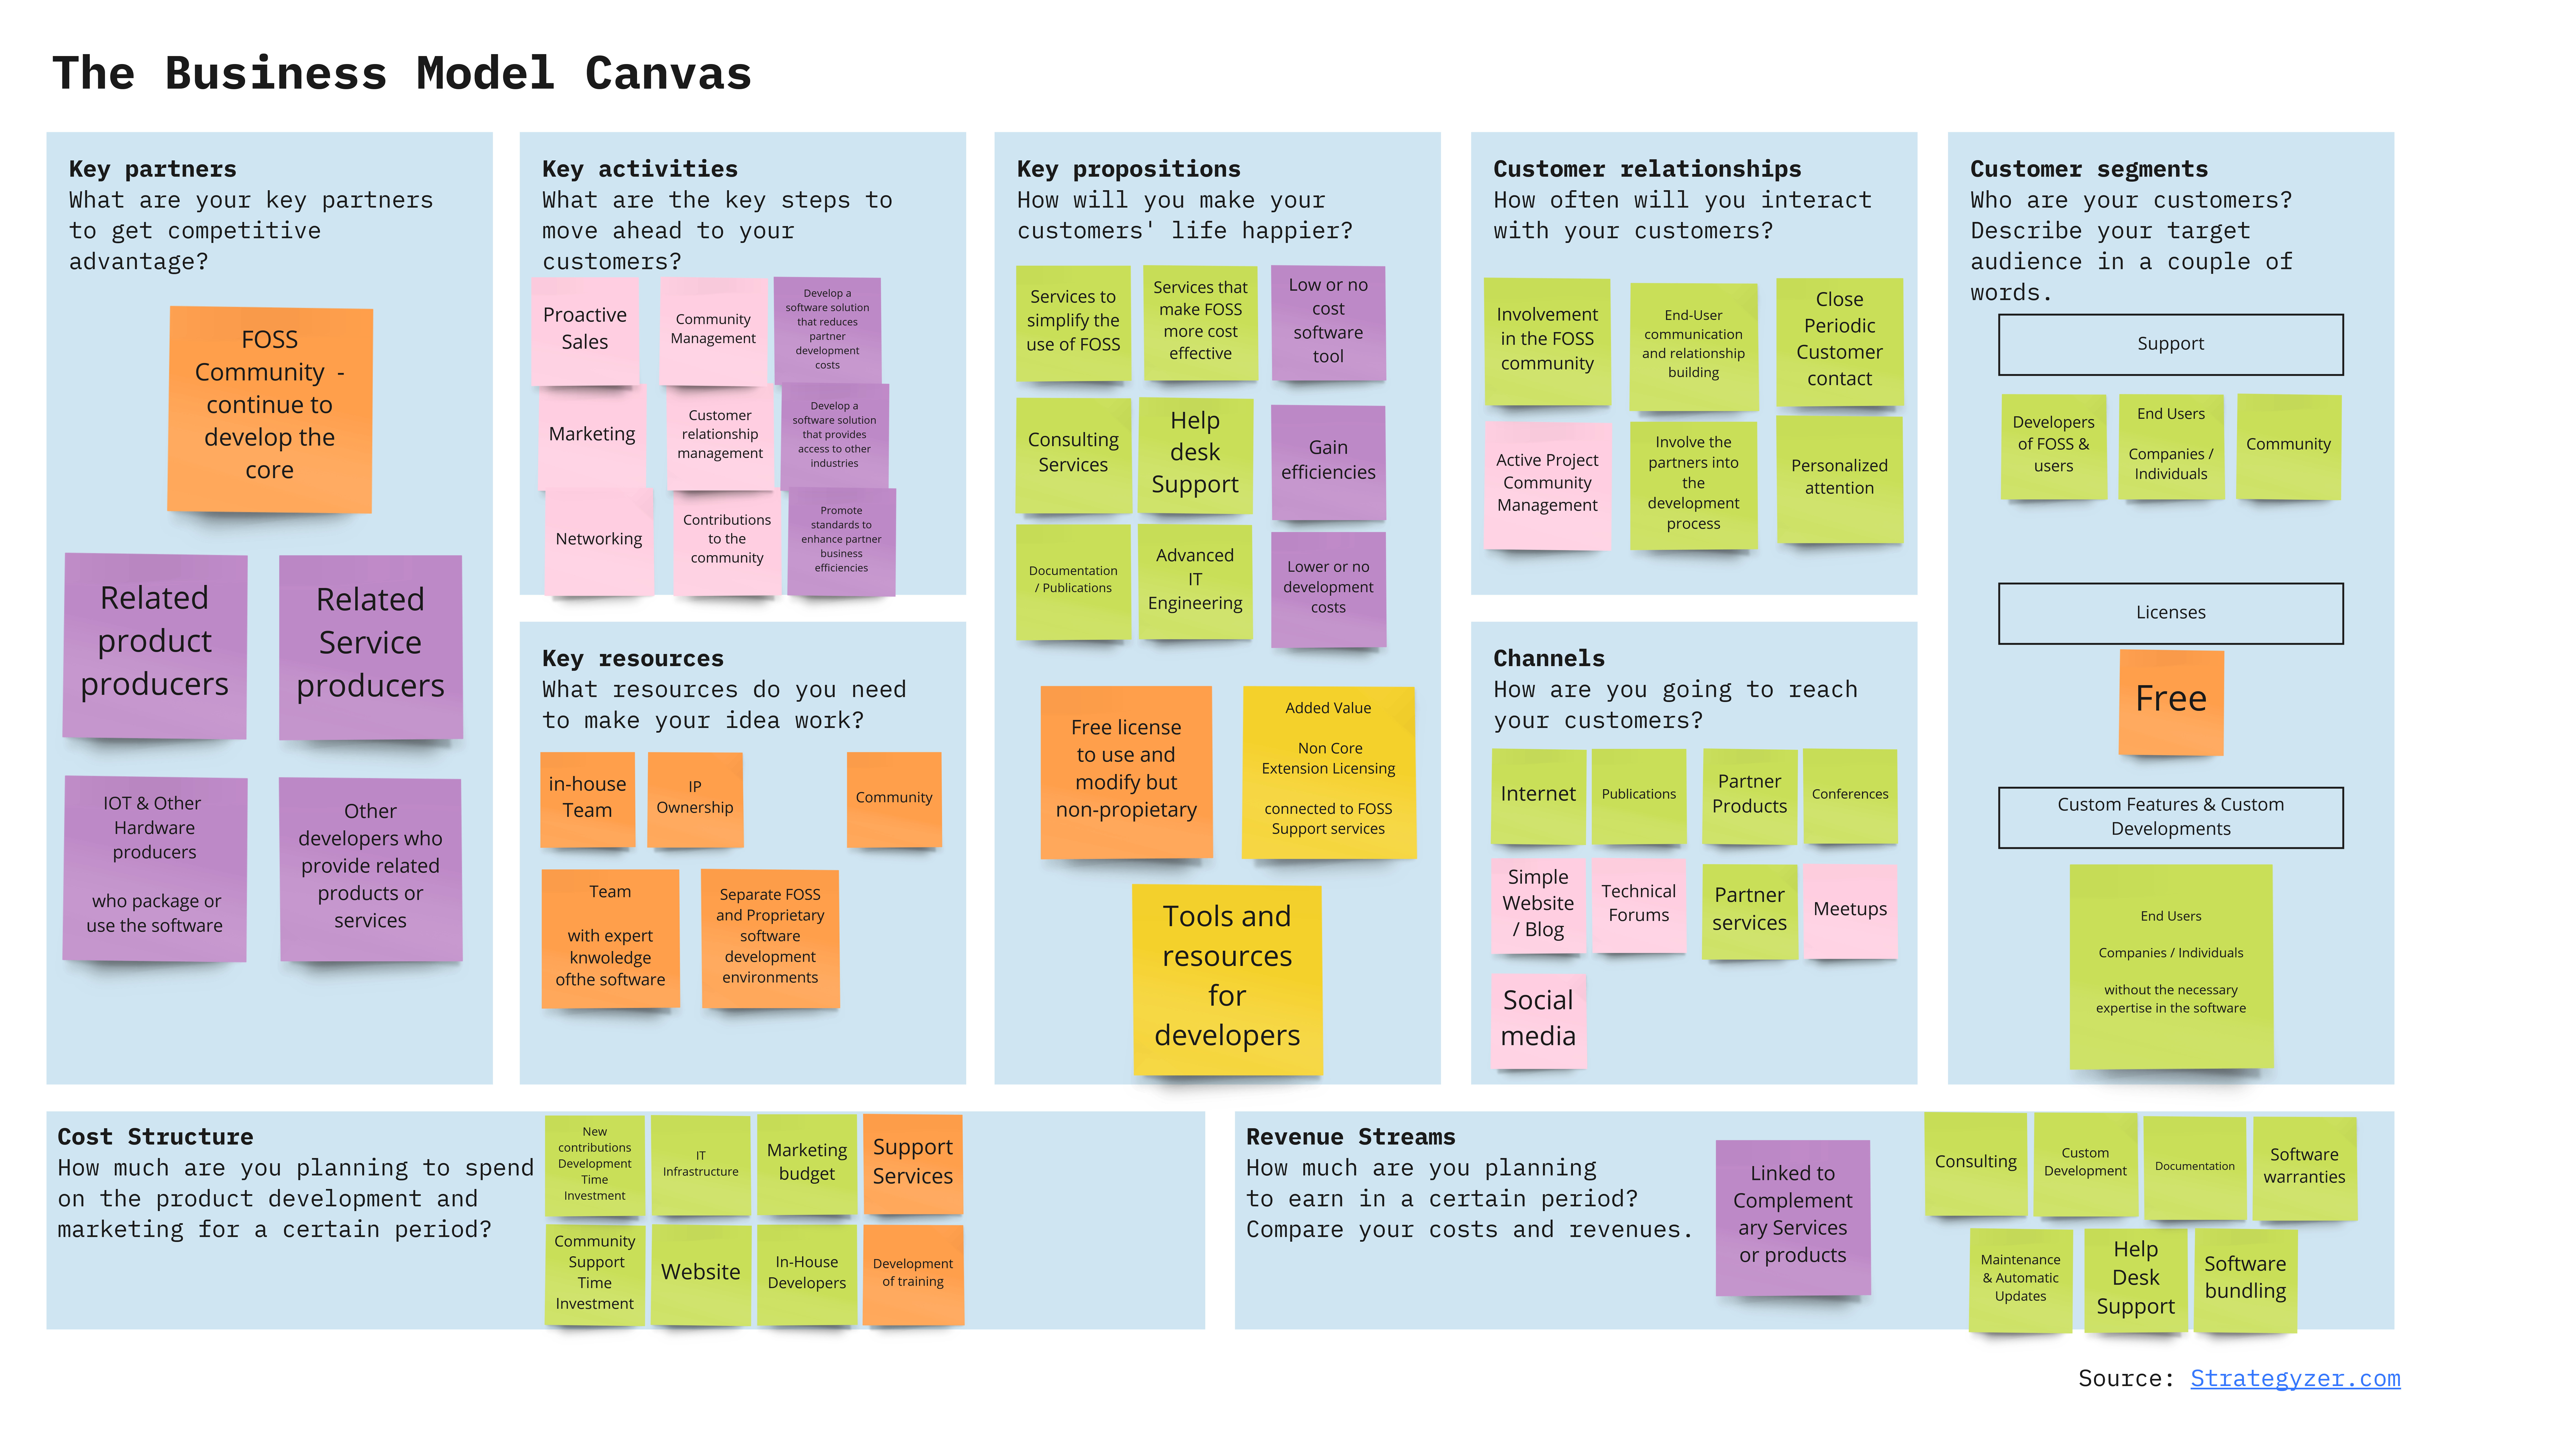 BUSINESS MODEL CANVAS: Leveraging FOSS to sell Other Complementary Products or Services